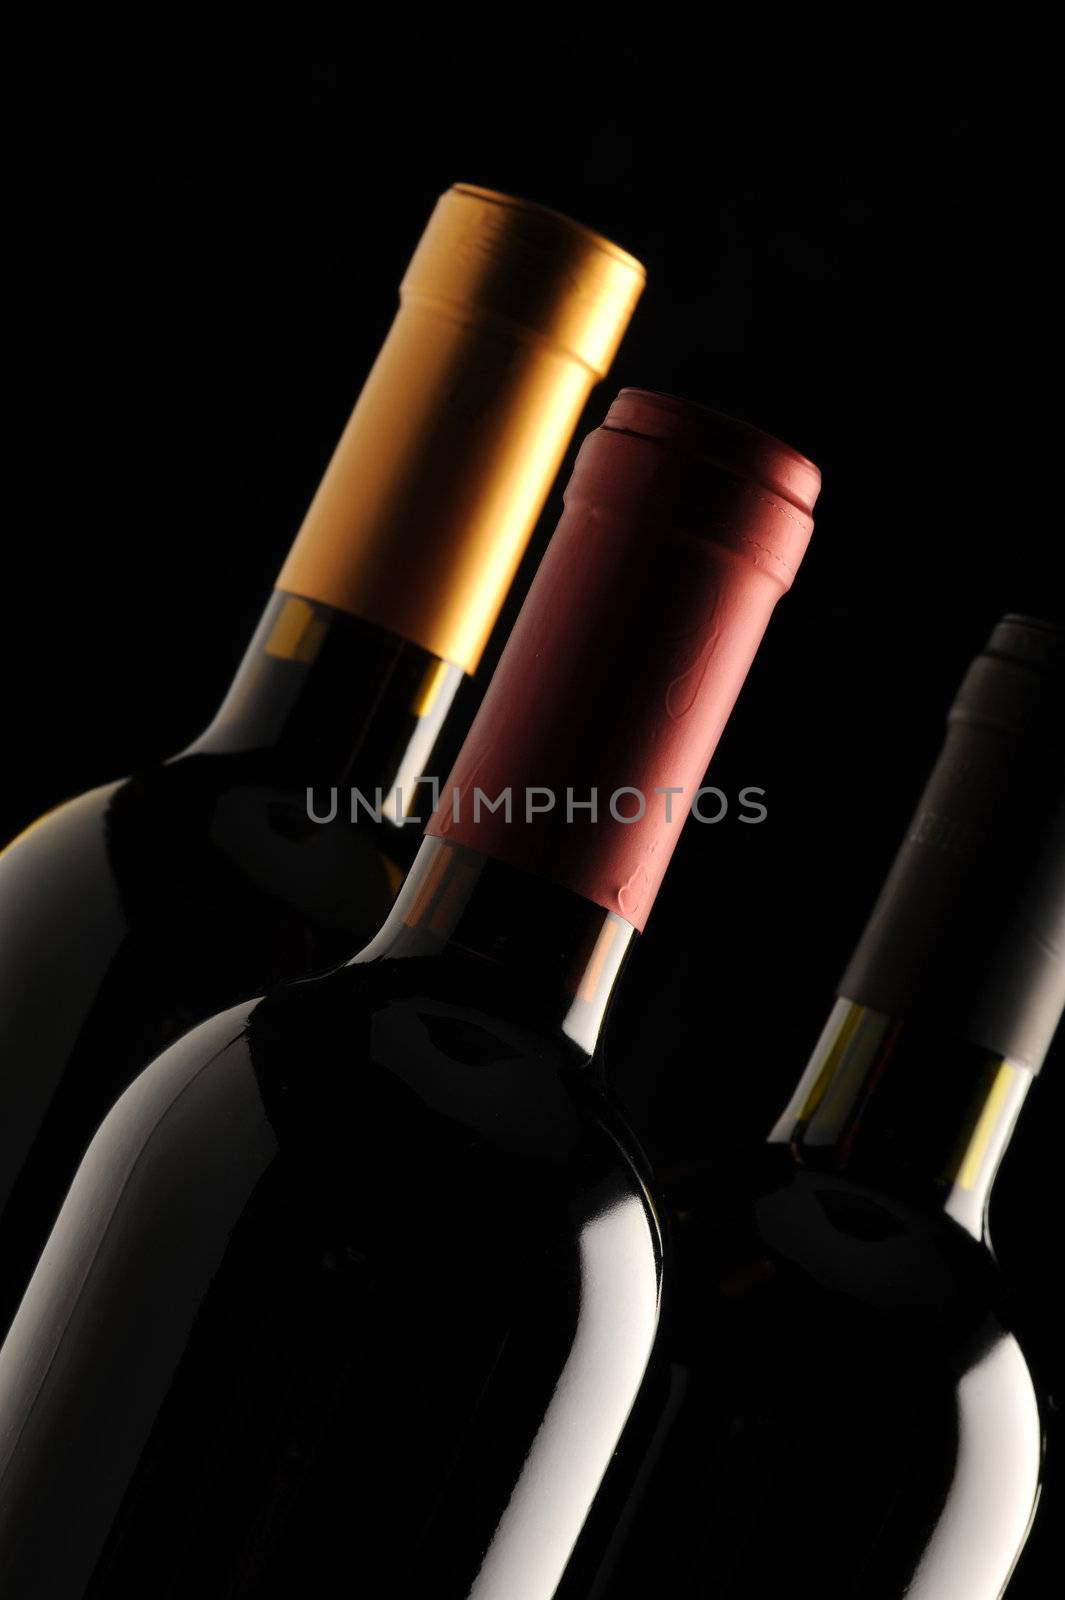 group of wine bottles by stokkete